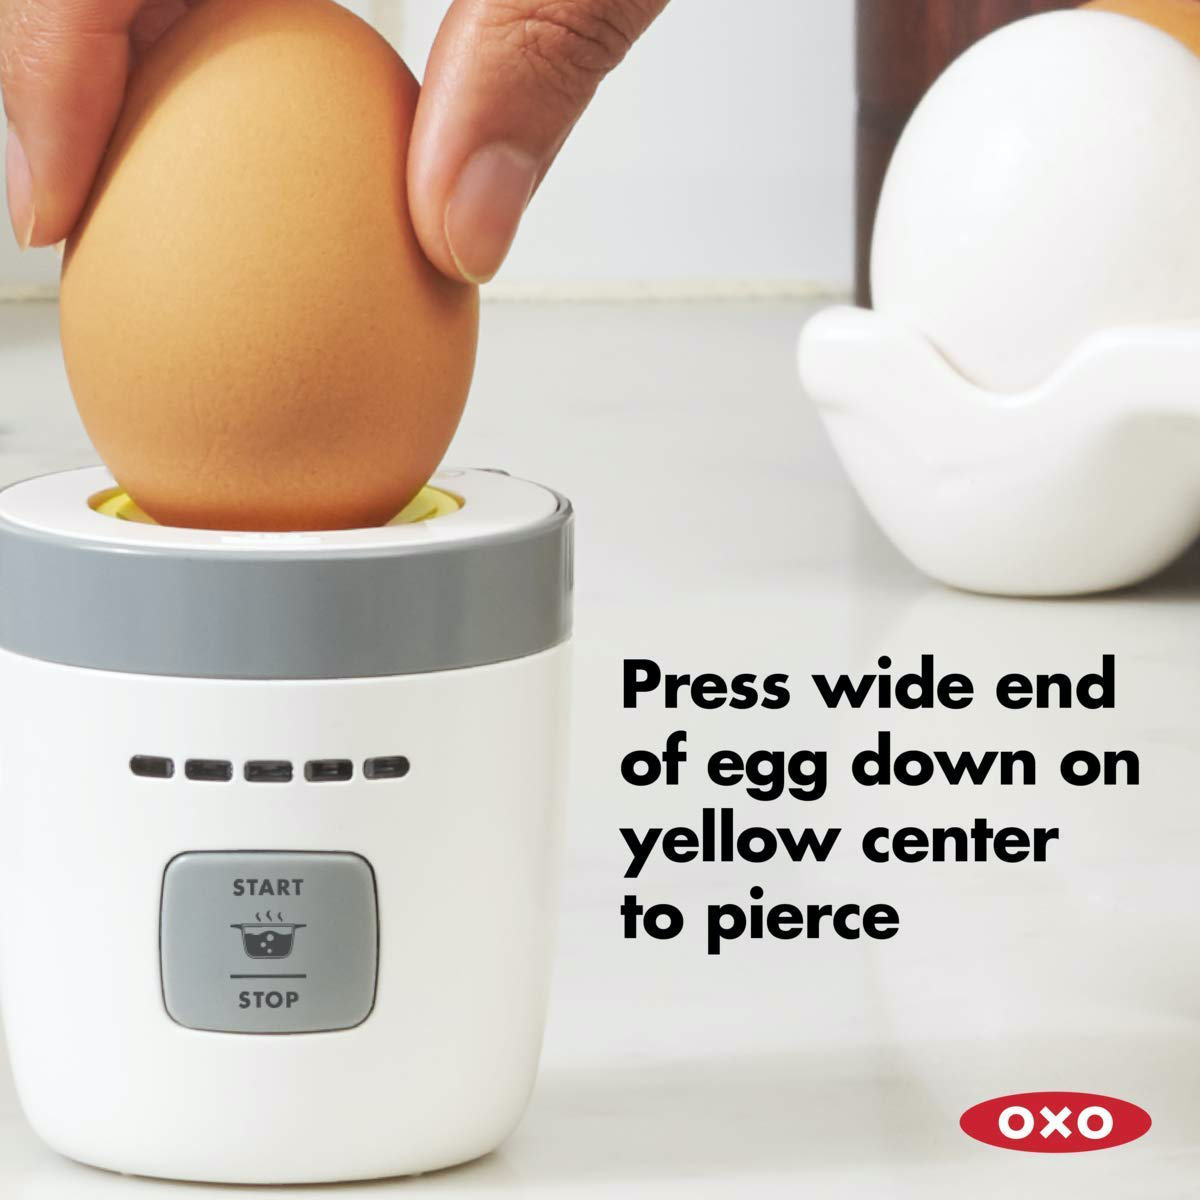 OXO Good Grips Digital Egg Timer with Piercer – I Crave This